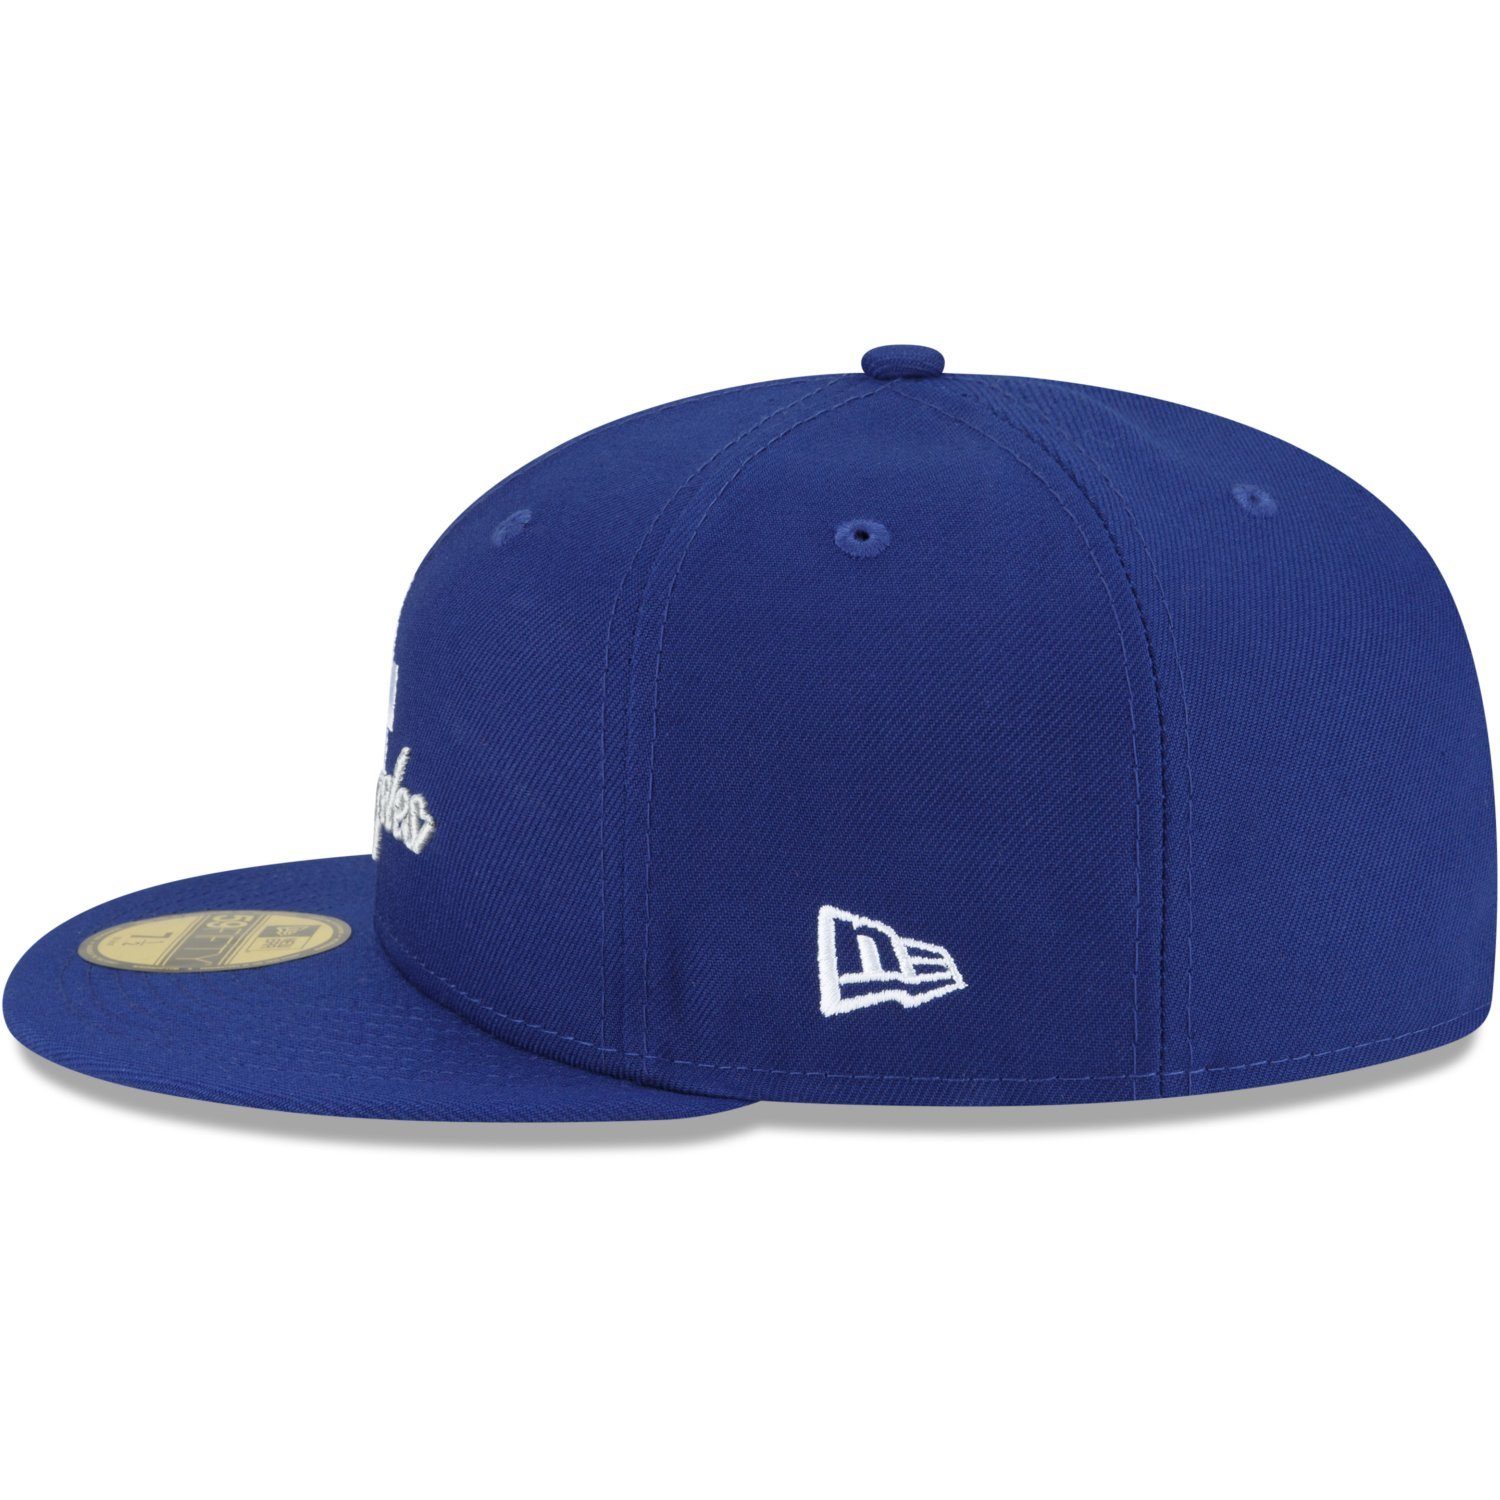 New Era Fitted Cap Angeles DUAL Dodgers Los 59Fifty LOGO